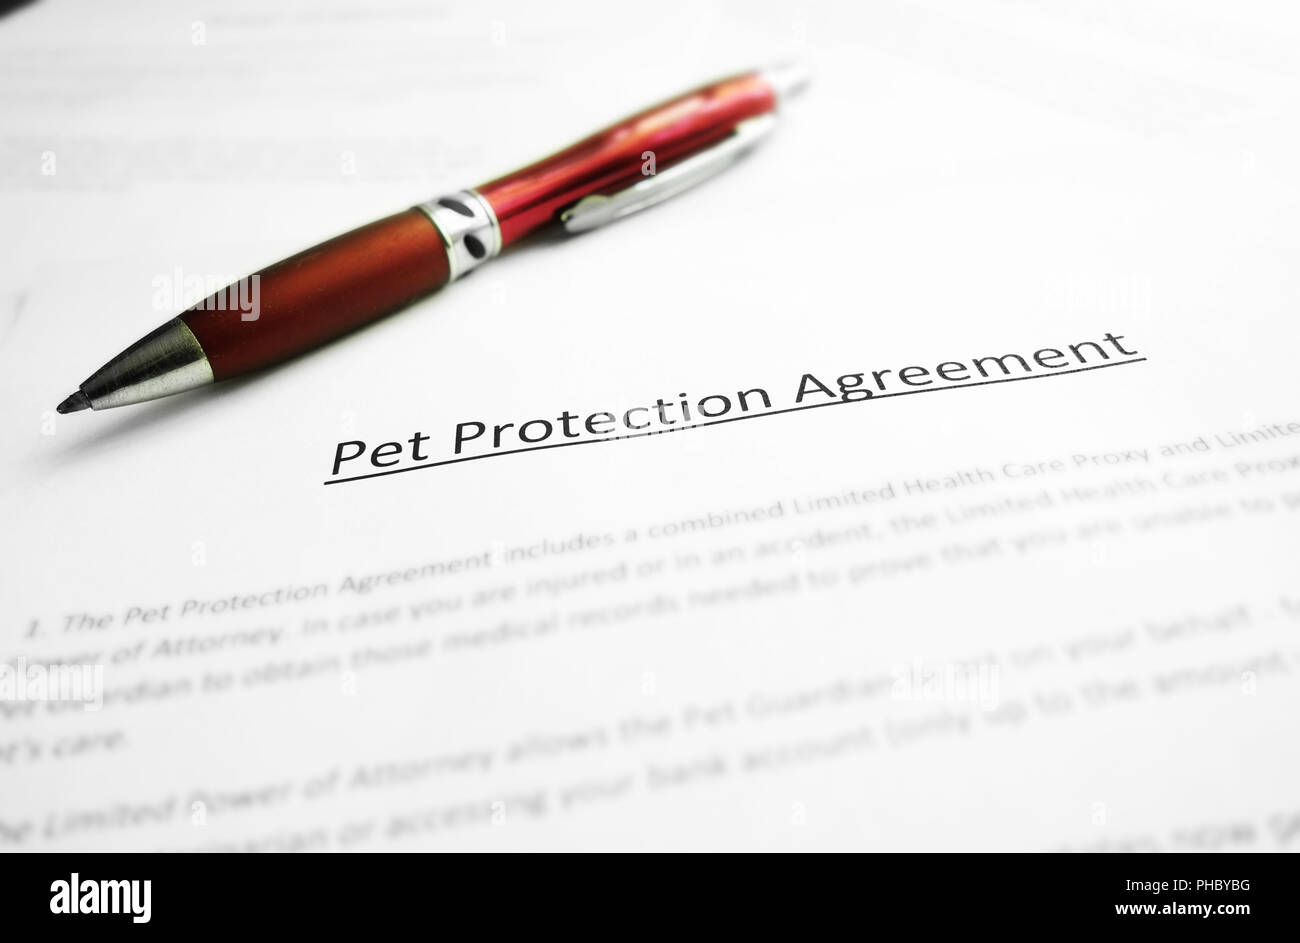 Pet Protection Agreement Stock Photo